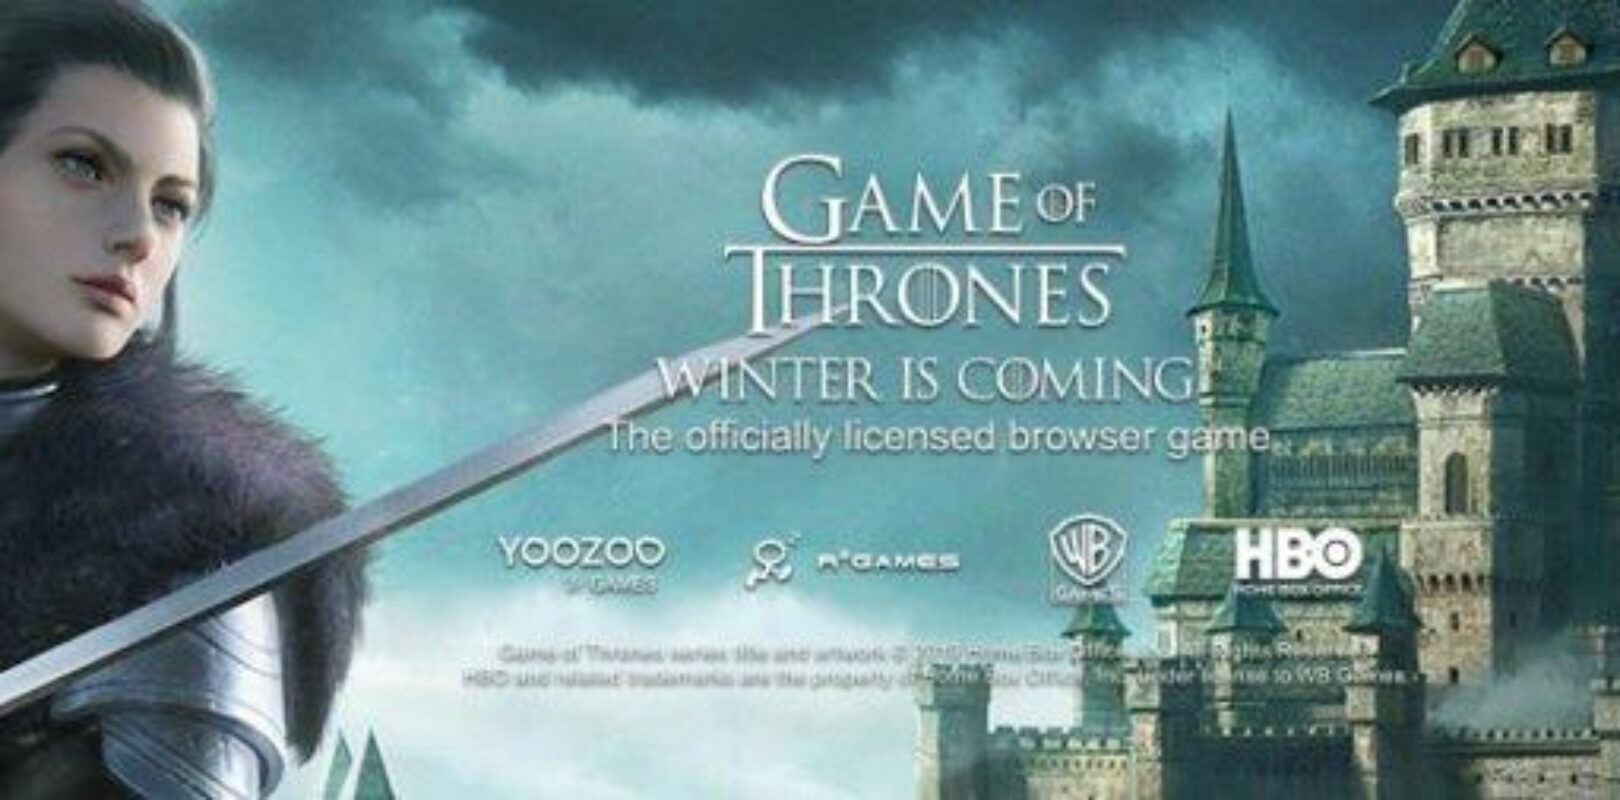 Grab A Promo Pack Key For Rts Game Of Thrones Winter Is Coming From Massively Op Pivotal Gamers - roblox massively overpowered